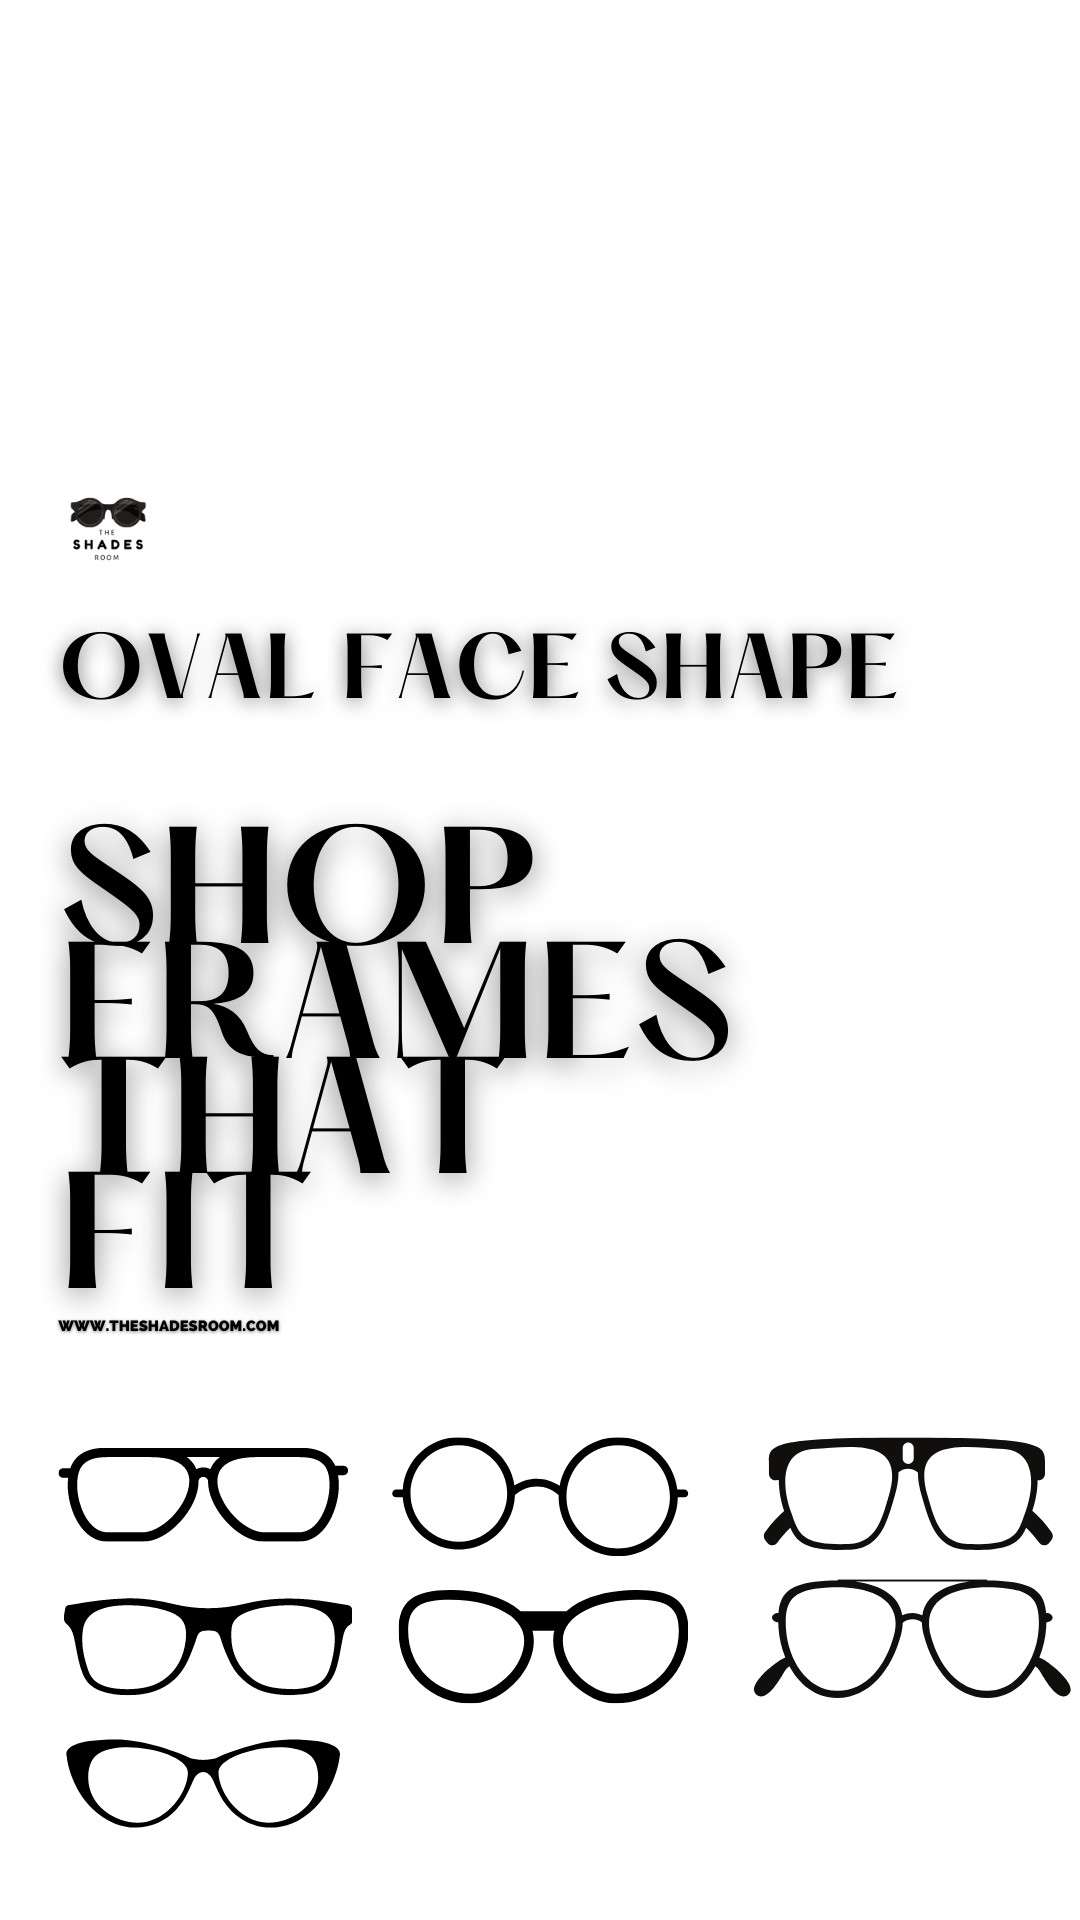 When it comes to an oval face shape. You are far from limited on options. Choose frames proportionate to your facial features, or go big and bring the drama...  The choice is yours.